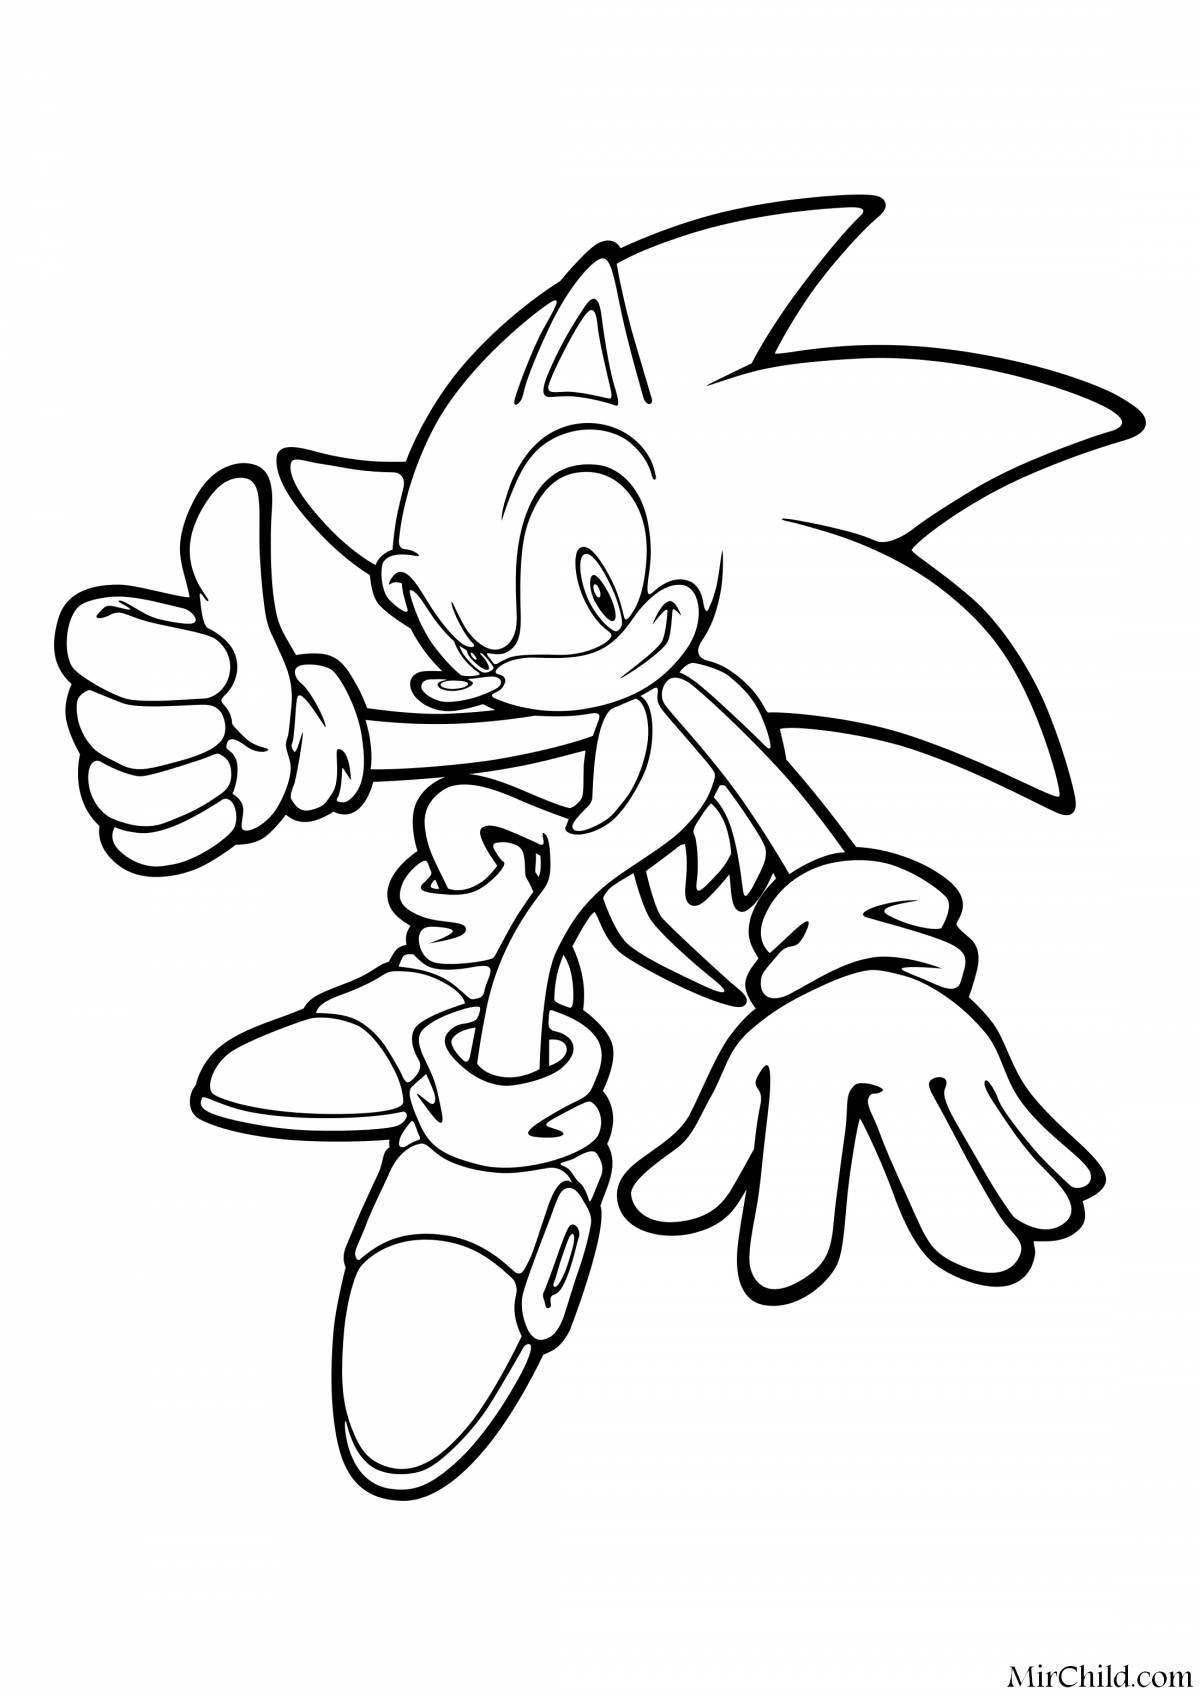 Fabulous blue sonic coloring page